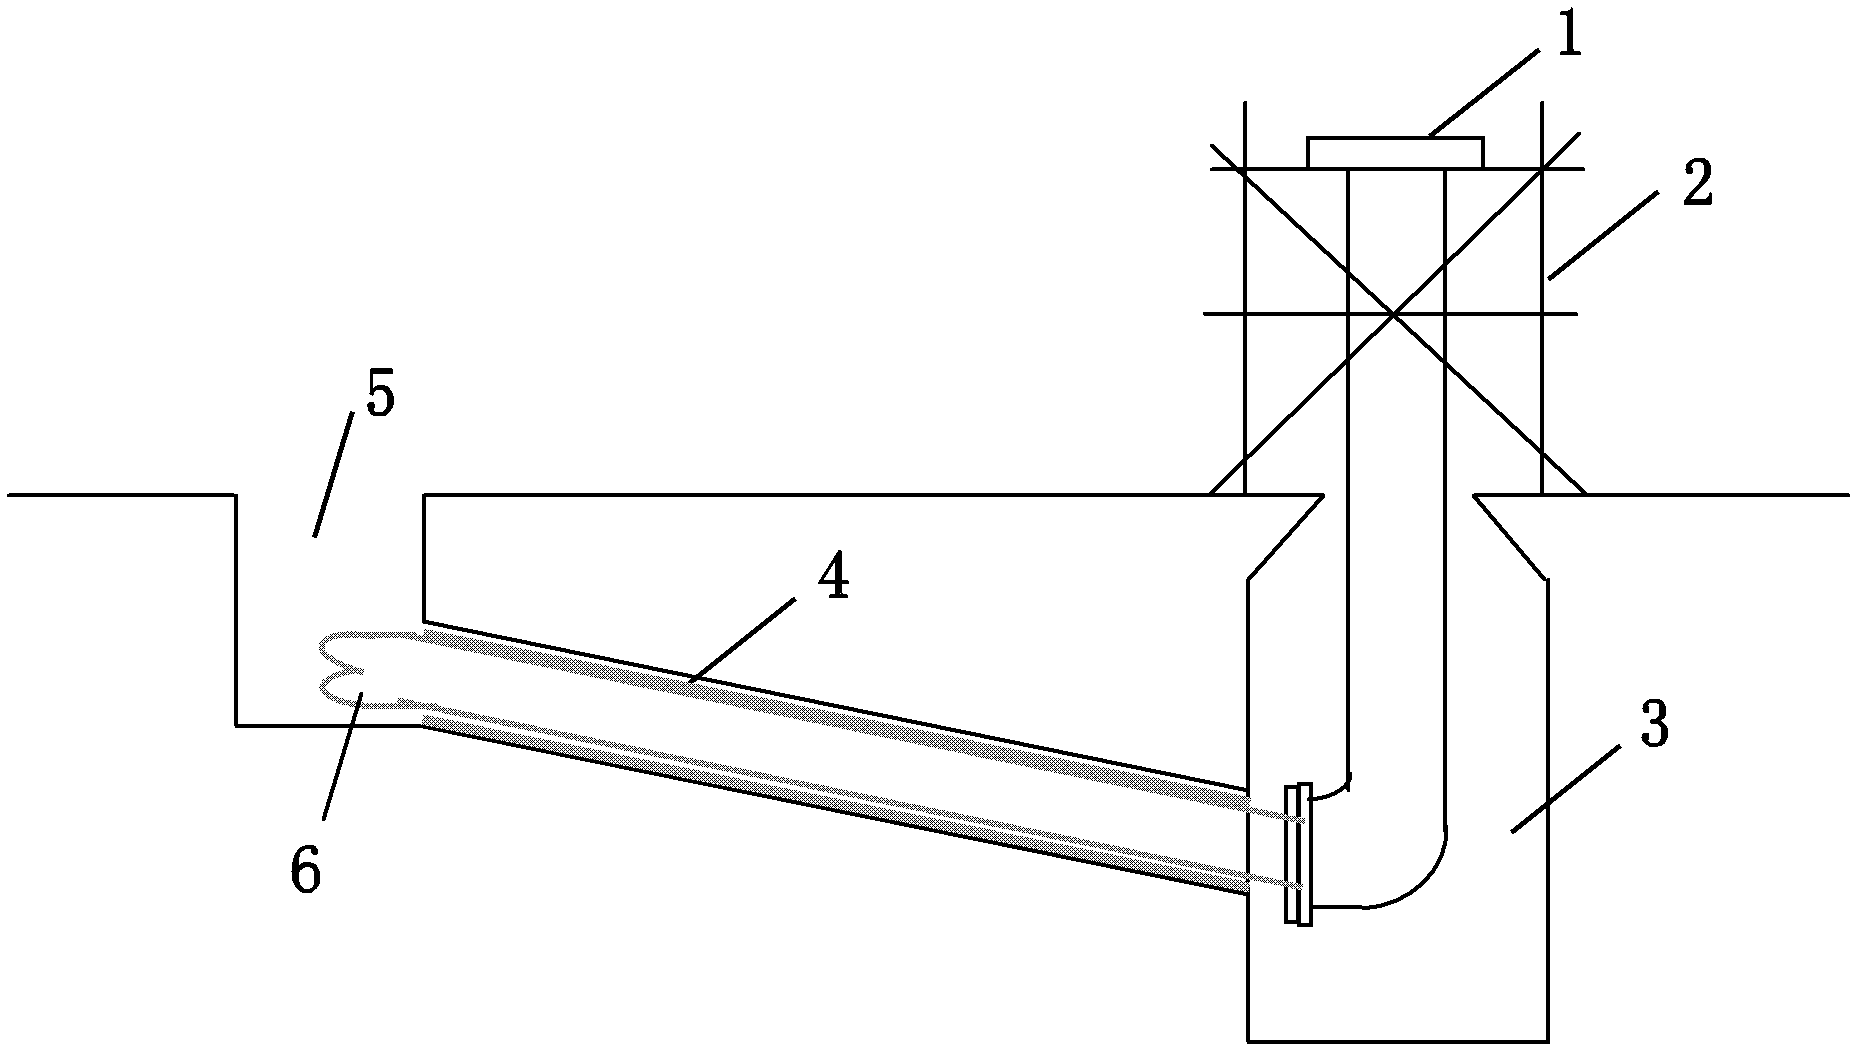 A non-excavation lining repair method for the repair of drainage branch pipes under urban roads